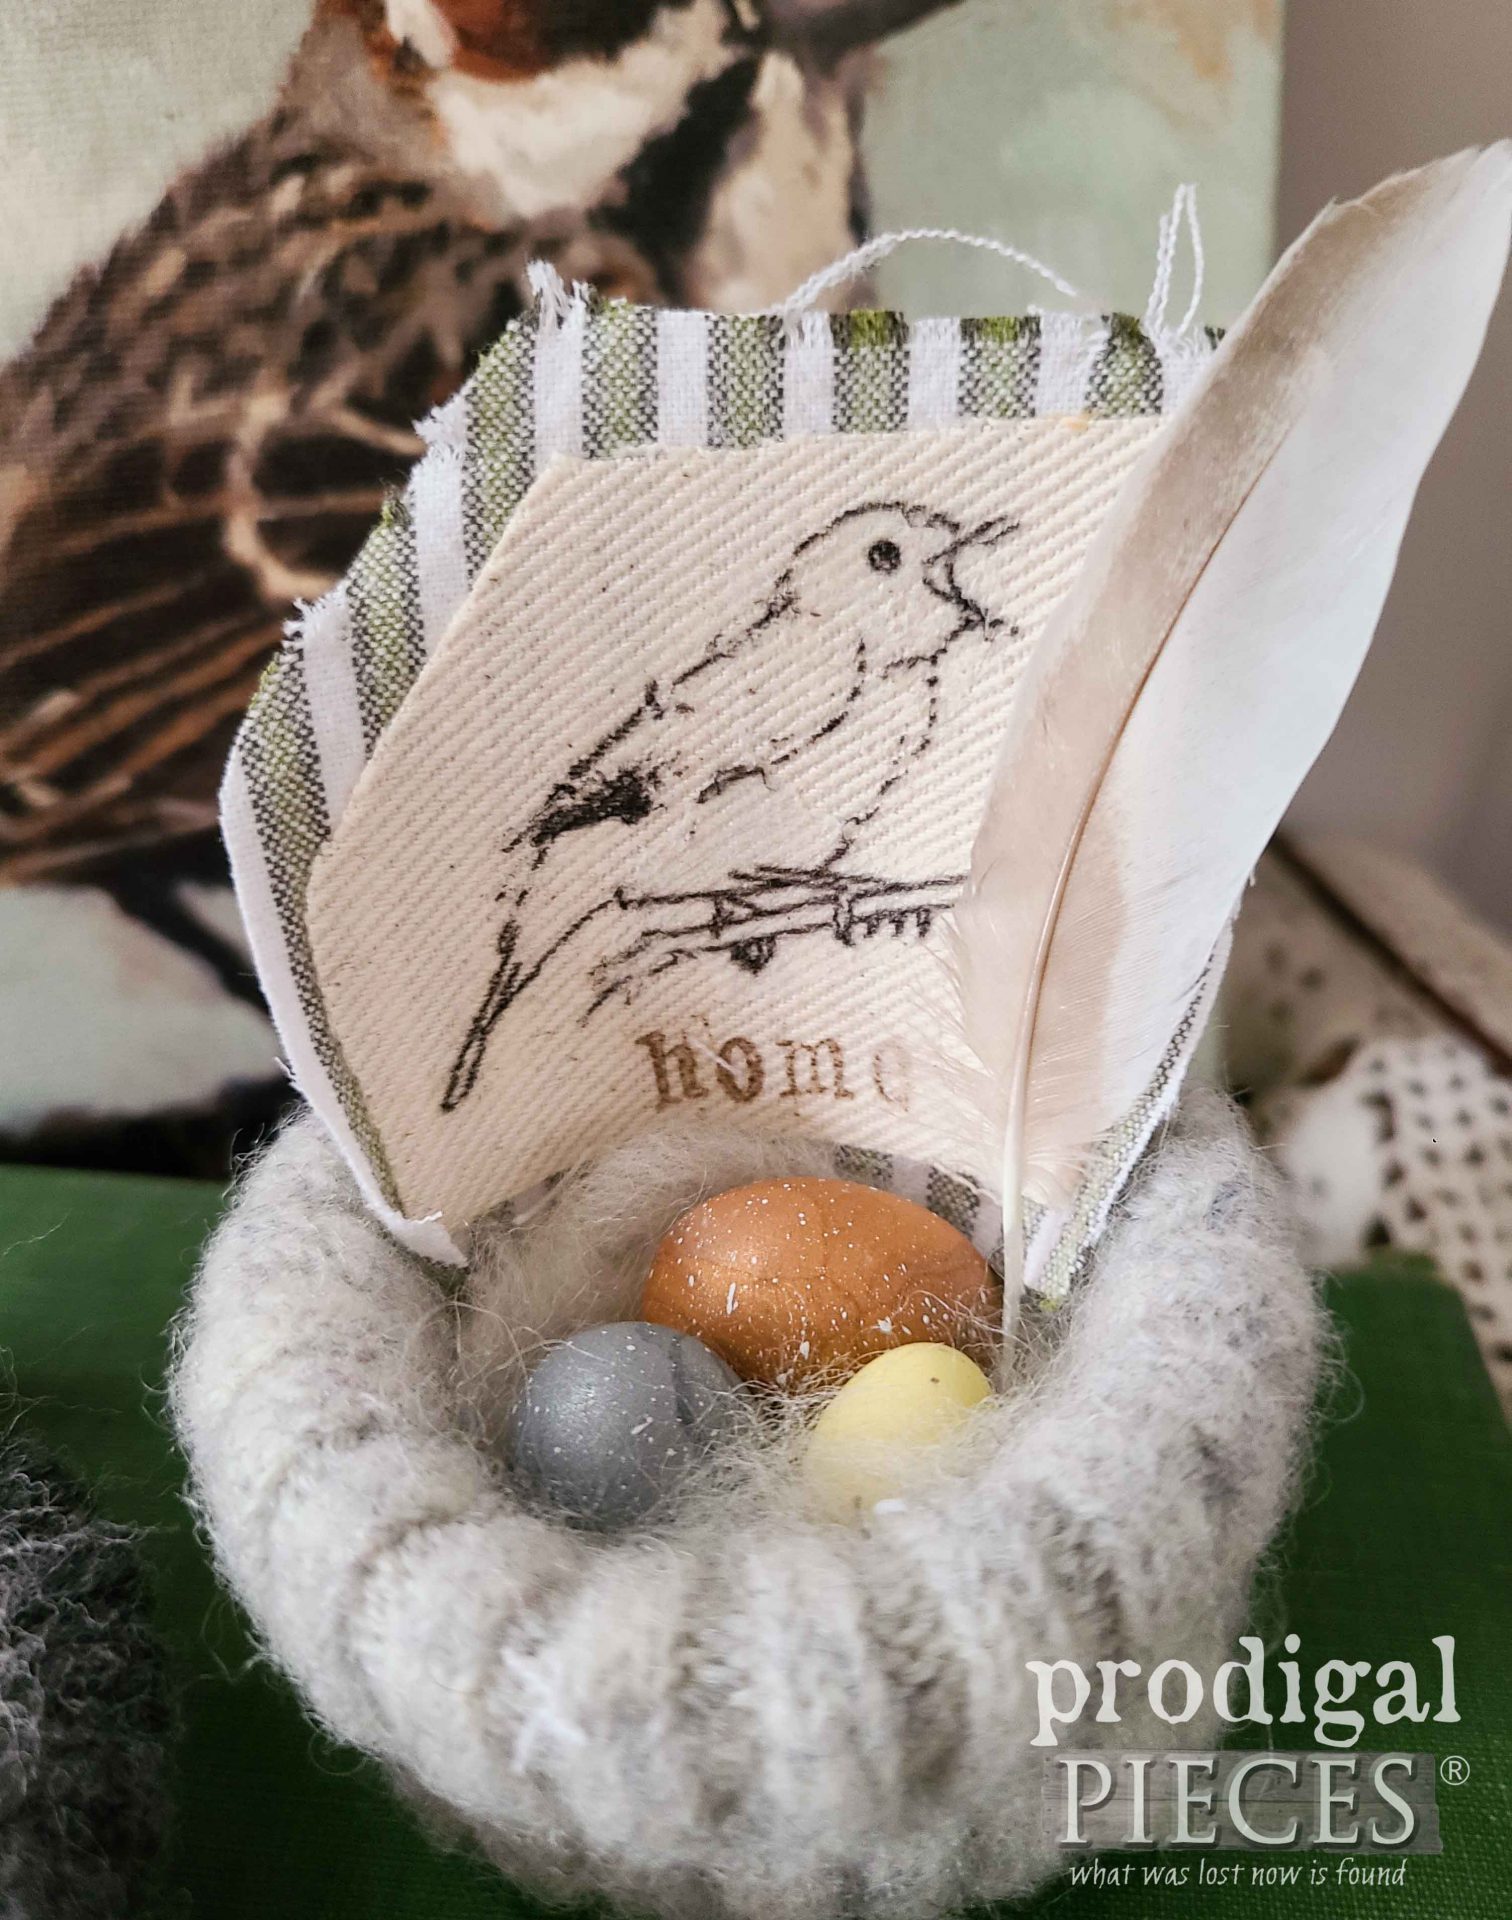 Handmade Upcycled Bird Nest with Speckled Eggs by Larissa of Prodigal Pieces | prodigalpieces.com #prodigalpieces #nest #spring #bird #farmhouse #upcycled